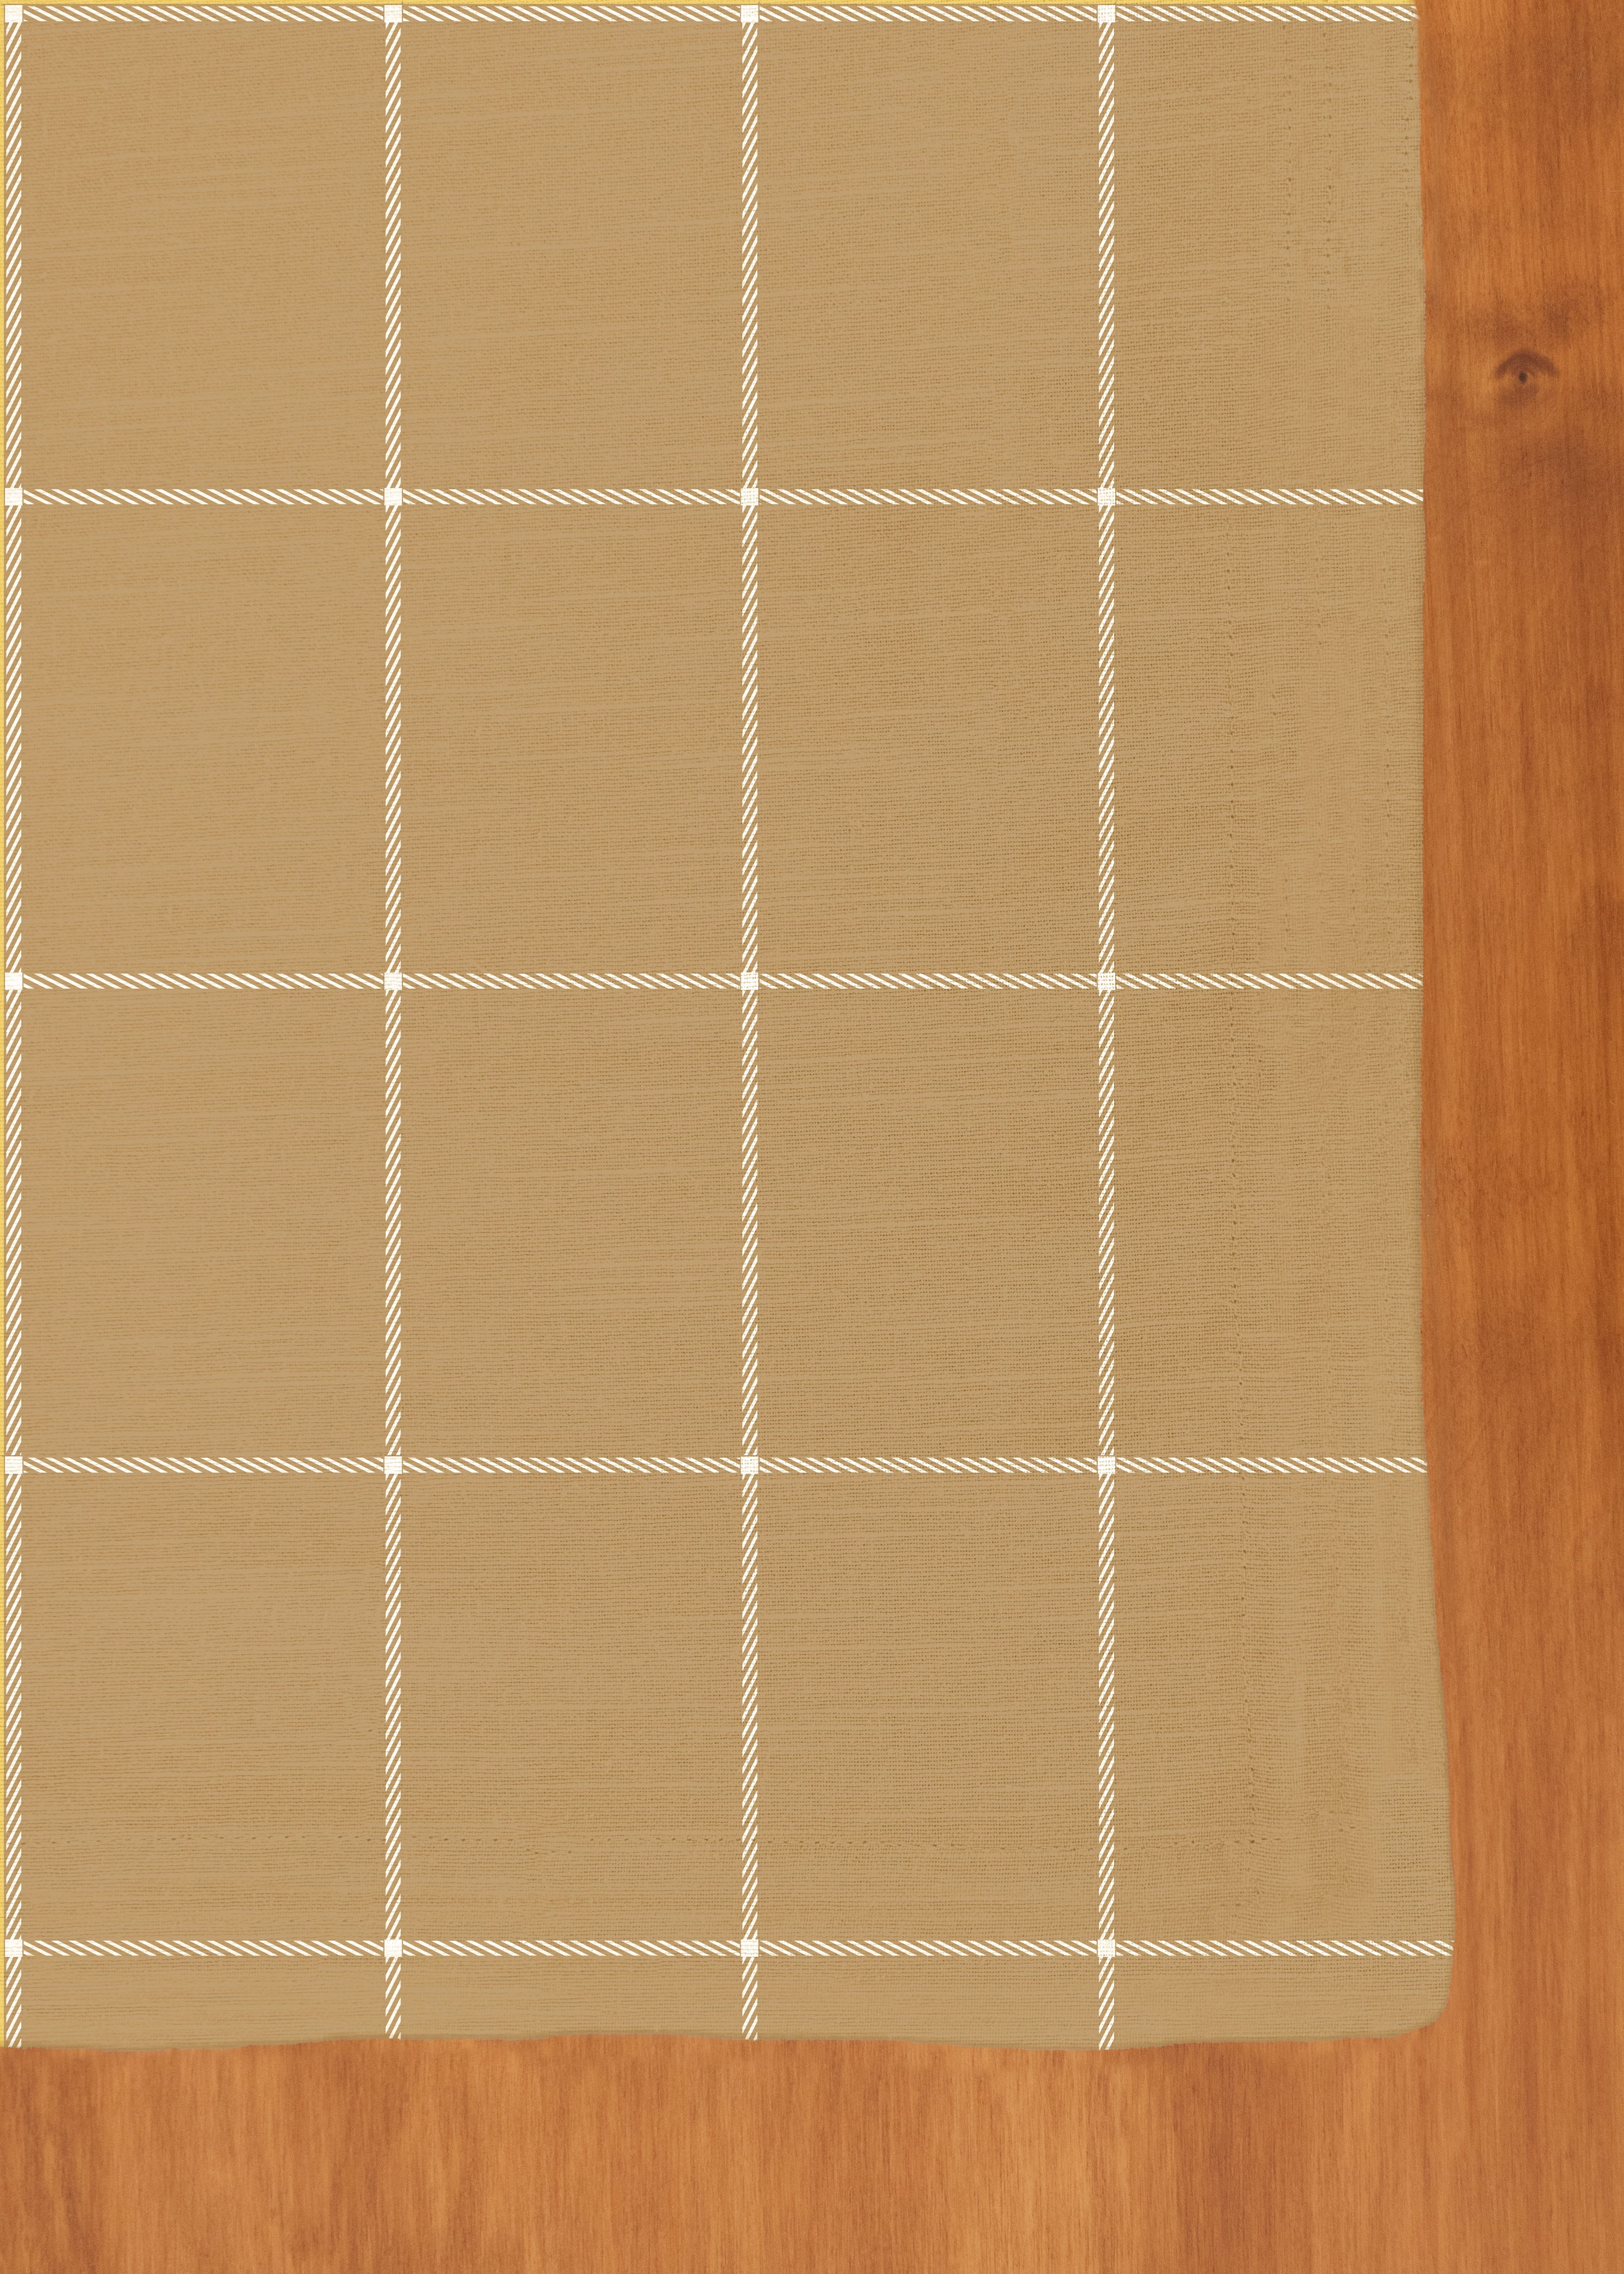 Cabin Checks 100% cotton neutral geometric table cloth for 4 seater or 6 seater dining - Brown